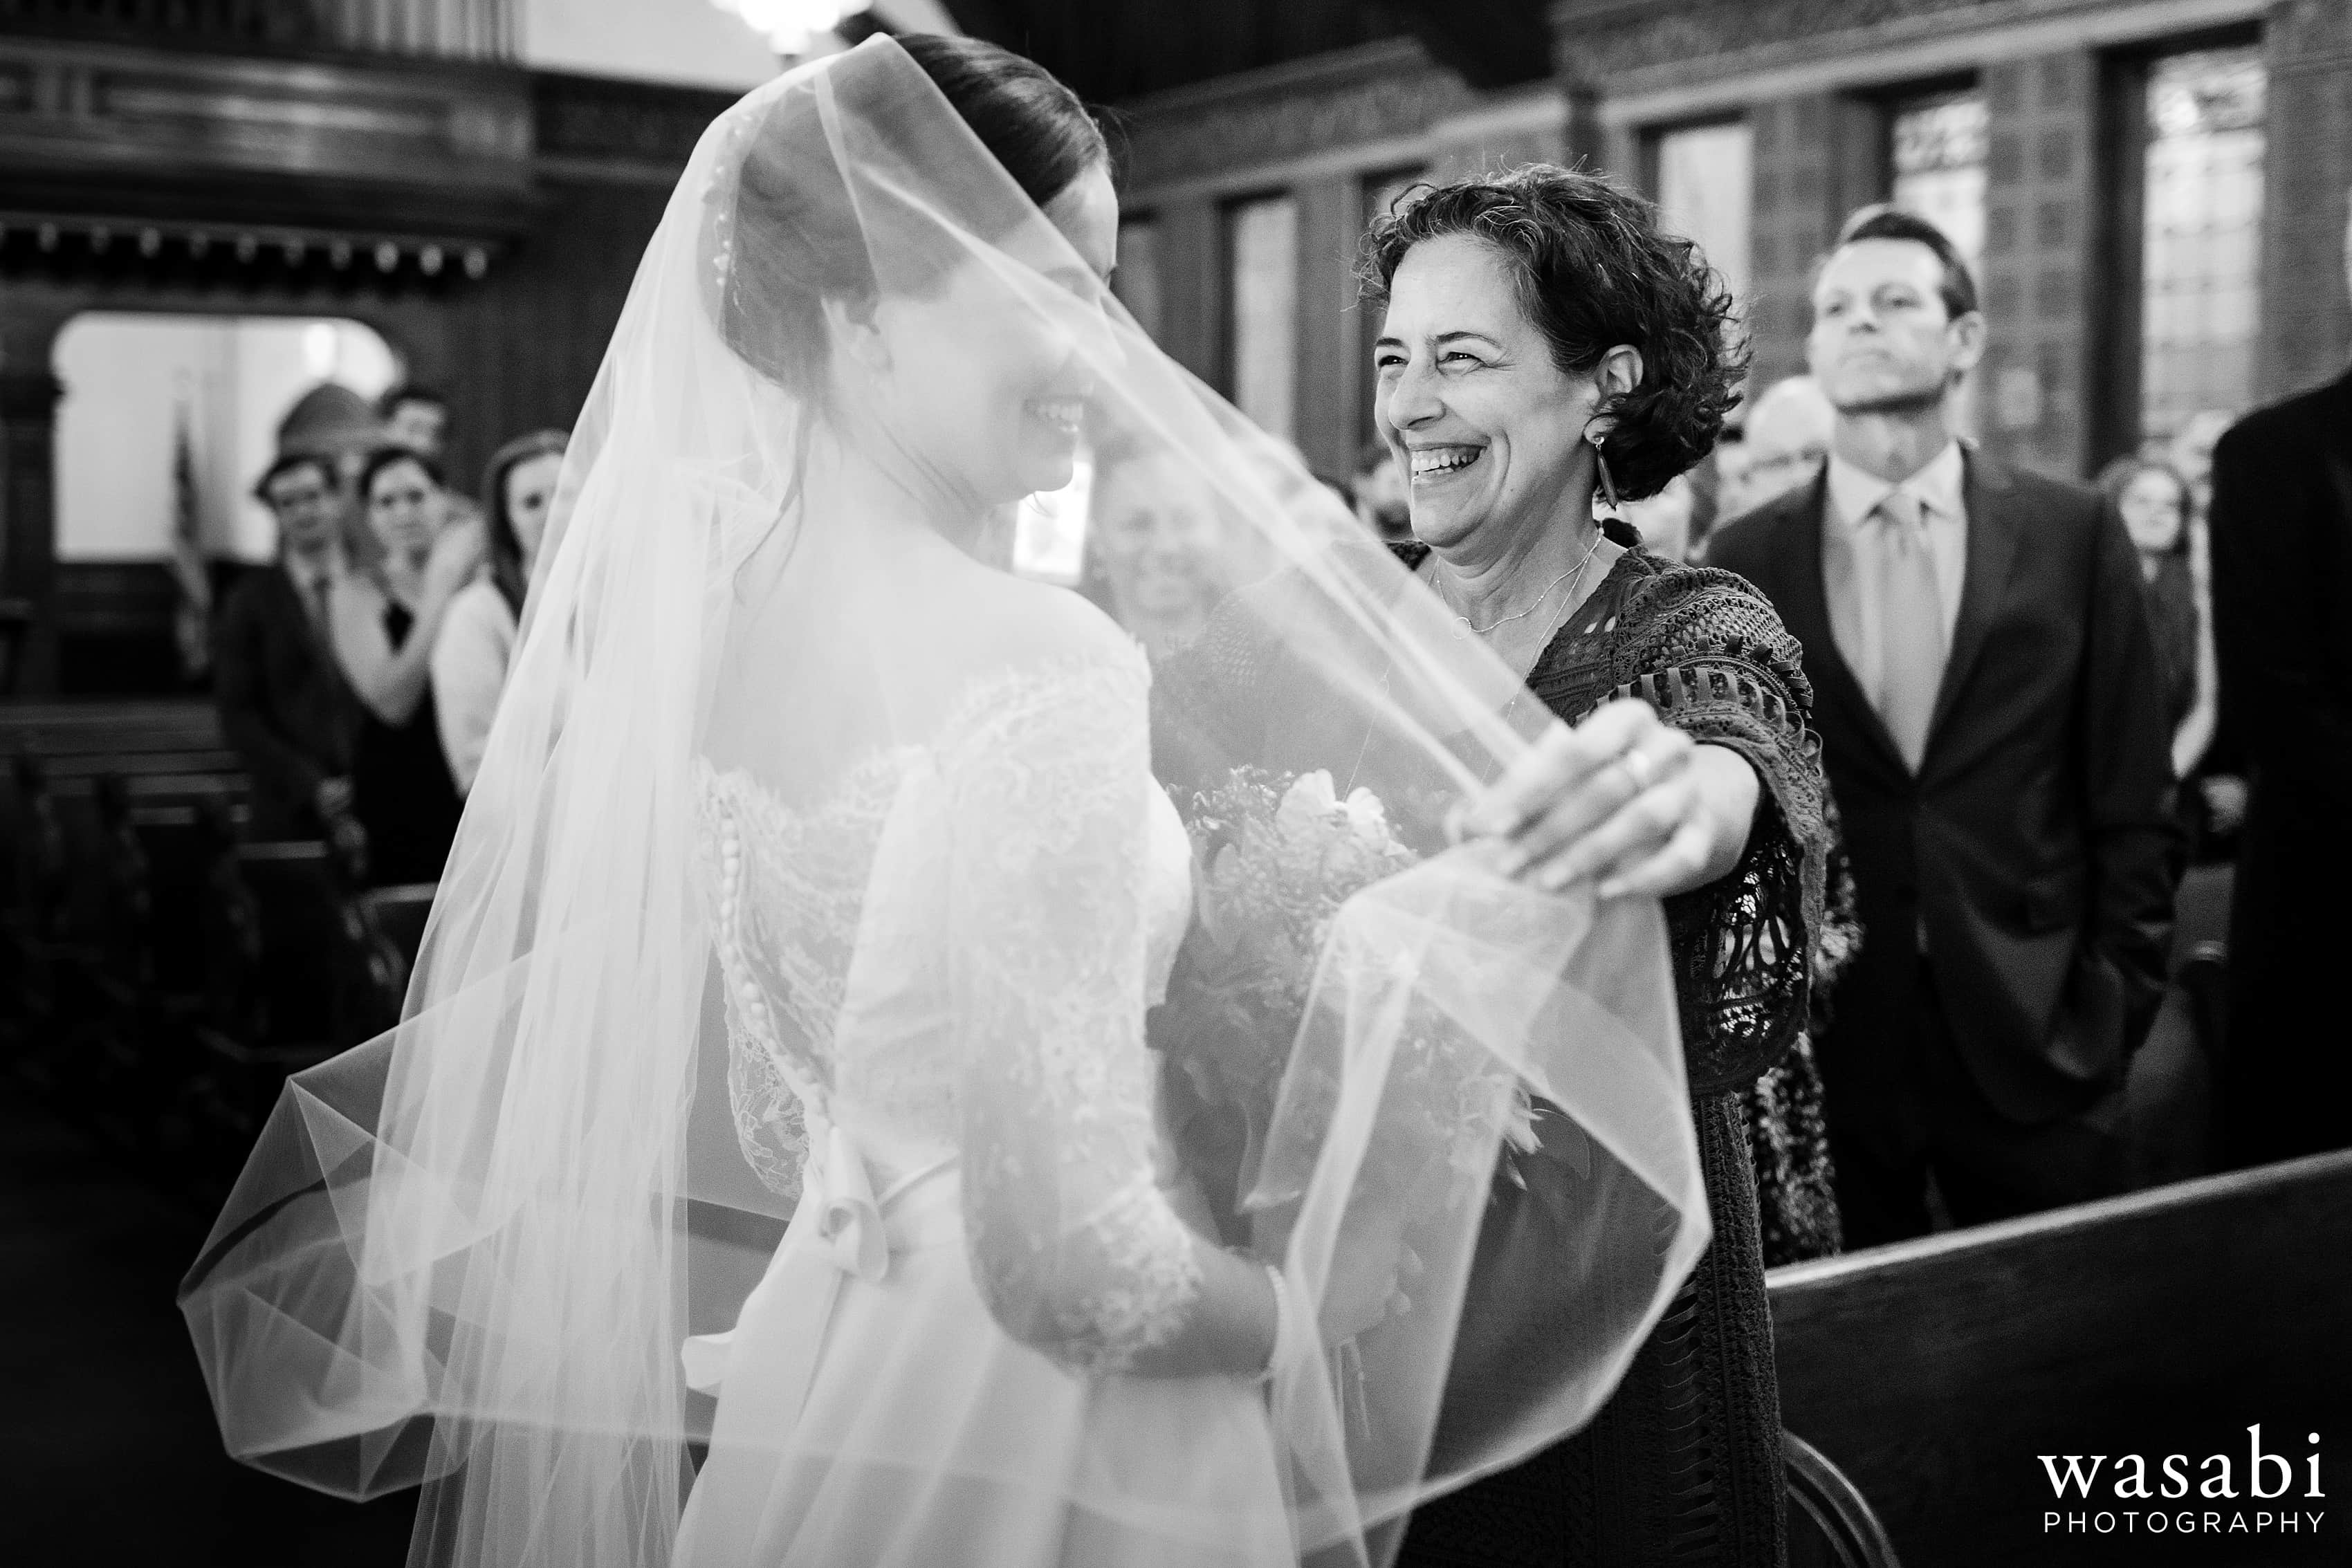 A look back at Wasabi Photography and Travis Haughton's best Chicago wedding photos of 2018, favorite moments and award winning photos. 